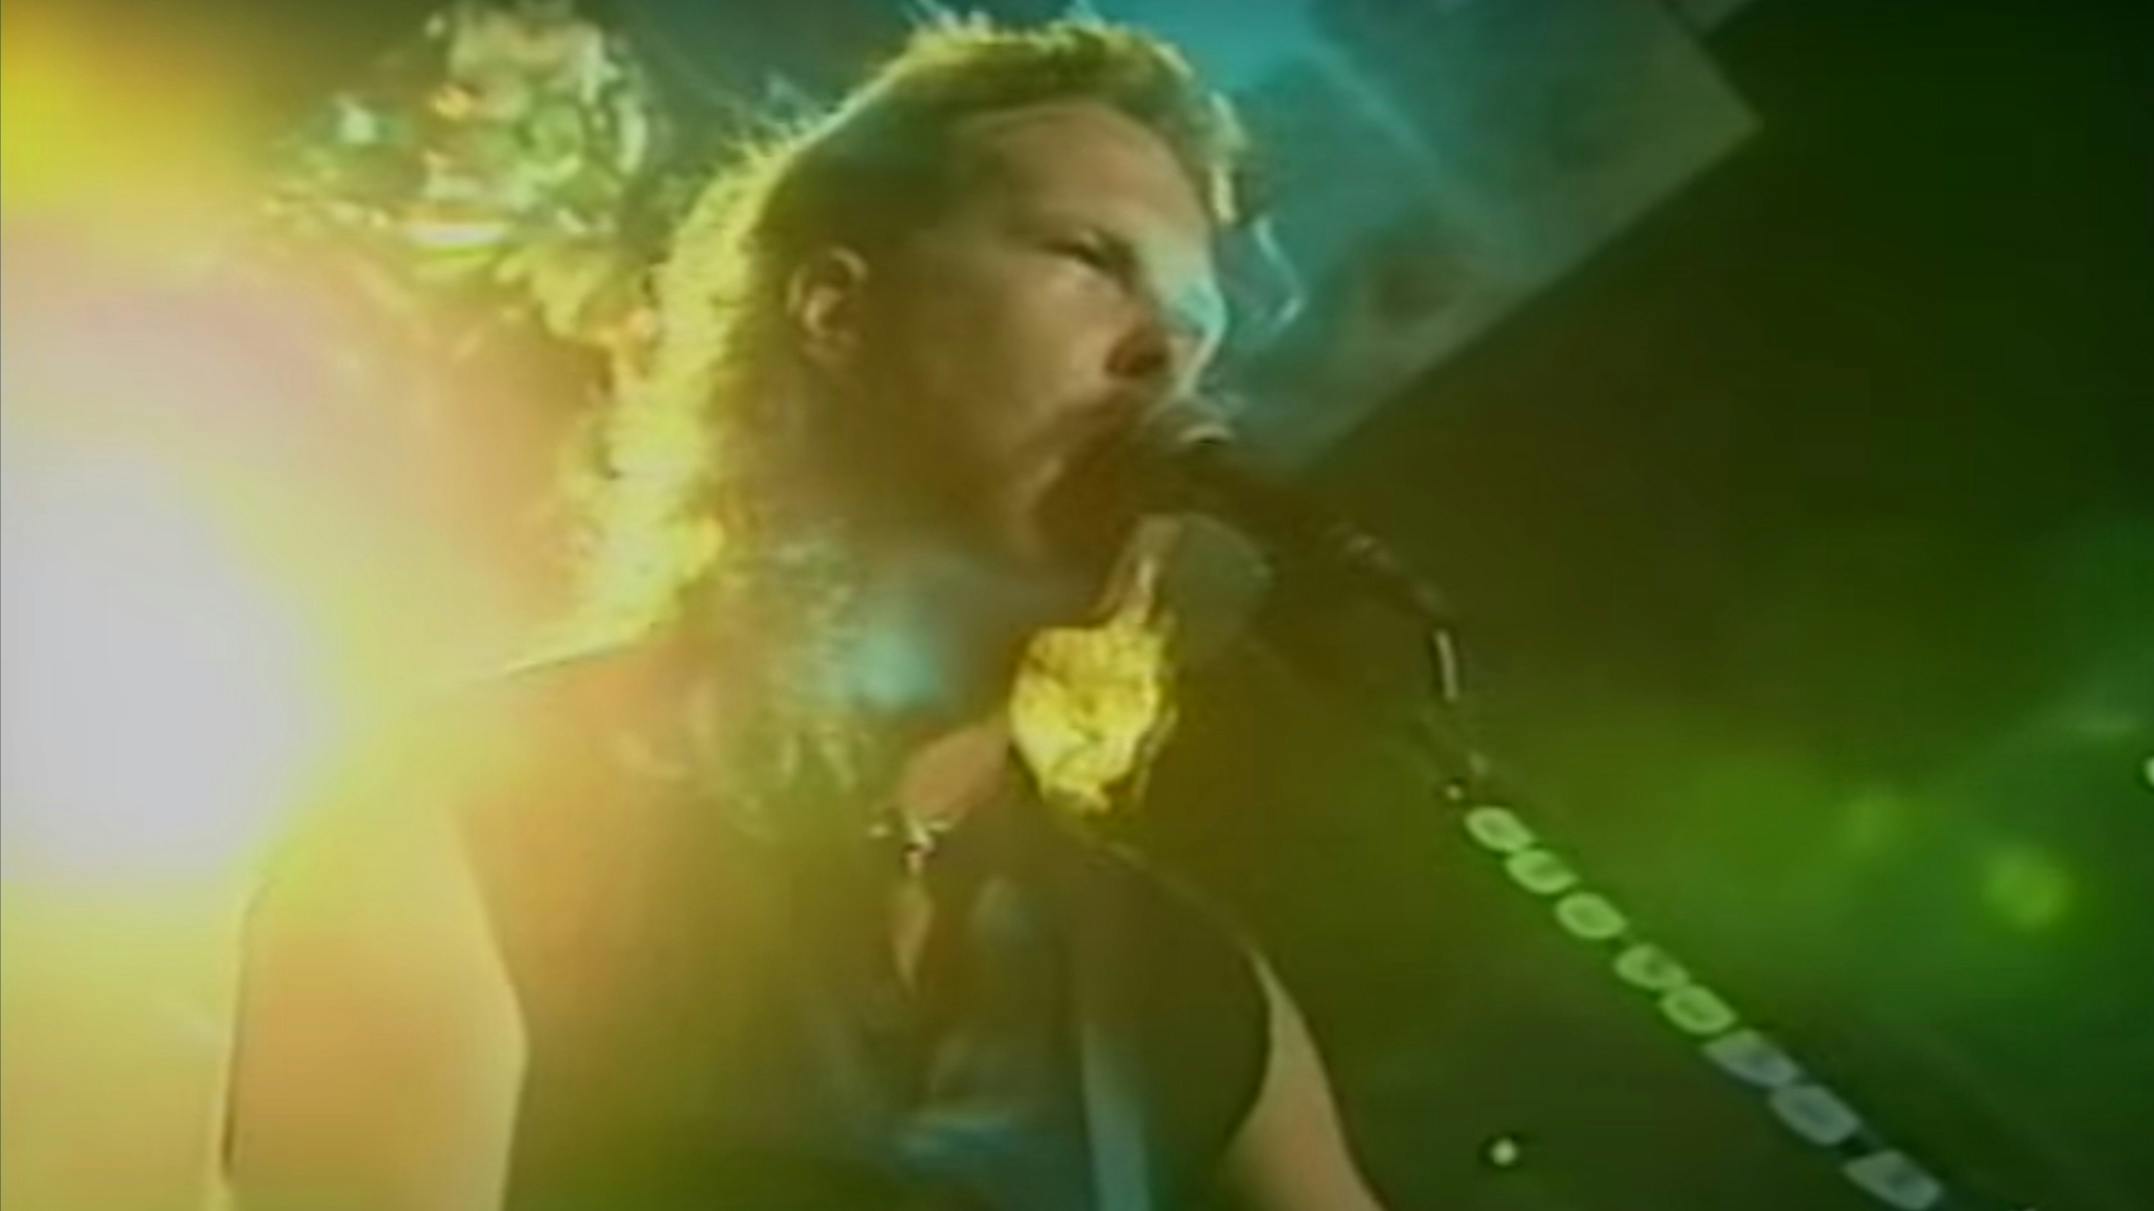 Watch Metallica Tear Up The Bay Area In This Epic 1994 Show